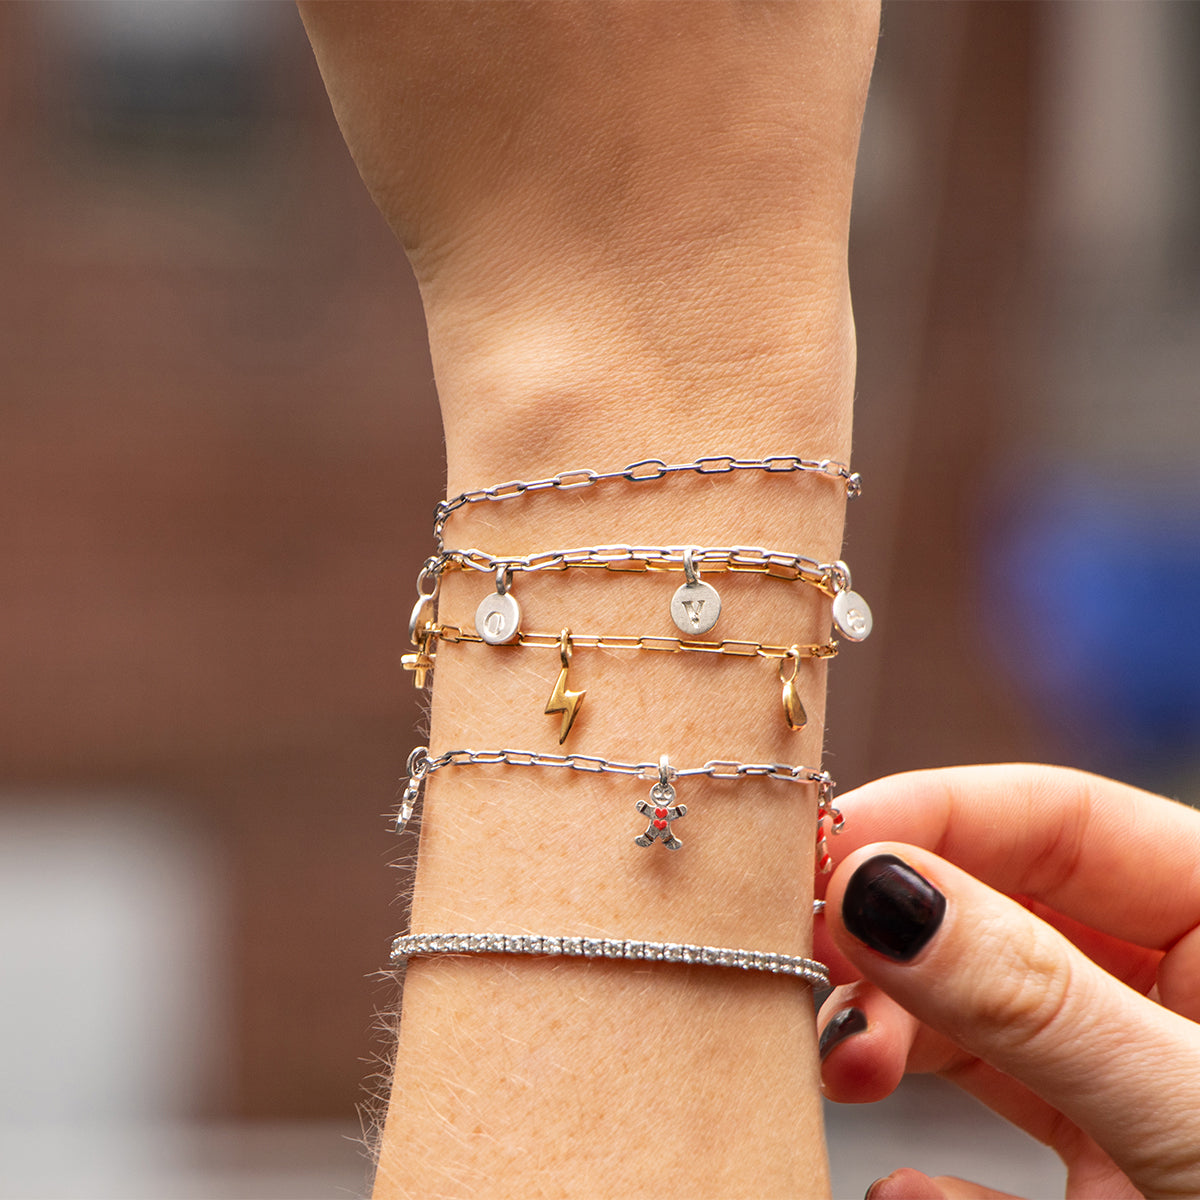 Mini Additions™ Paperclip Bracelet in Sterling Silver